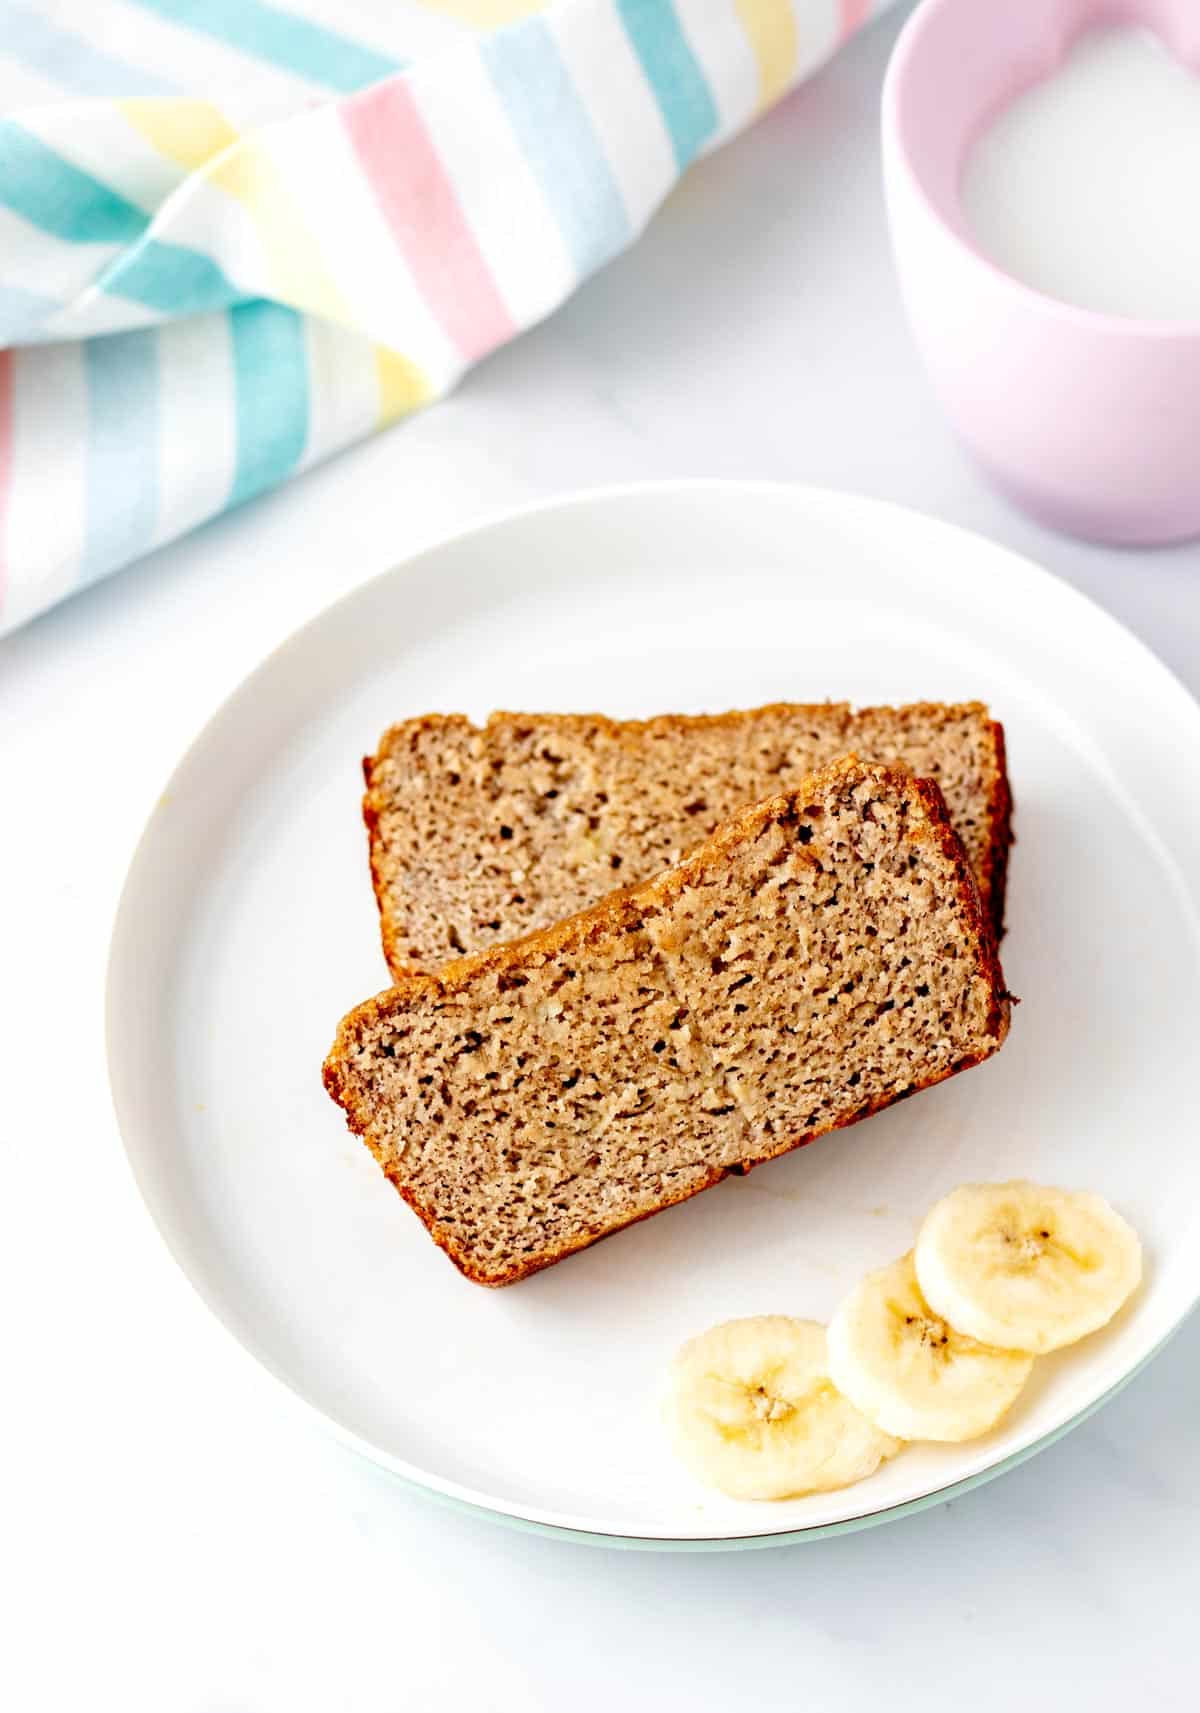 Two slices of no added sugar banana bread on a plate with banana slices.